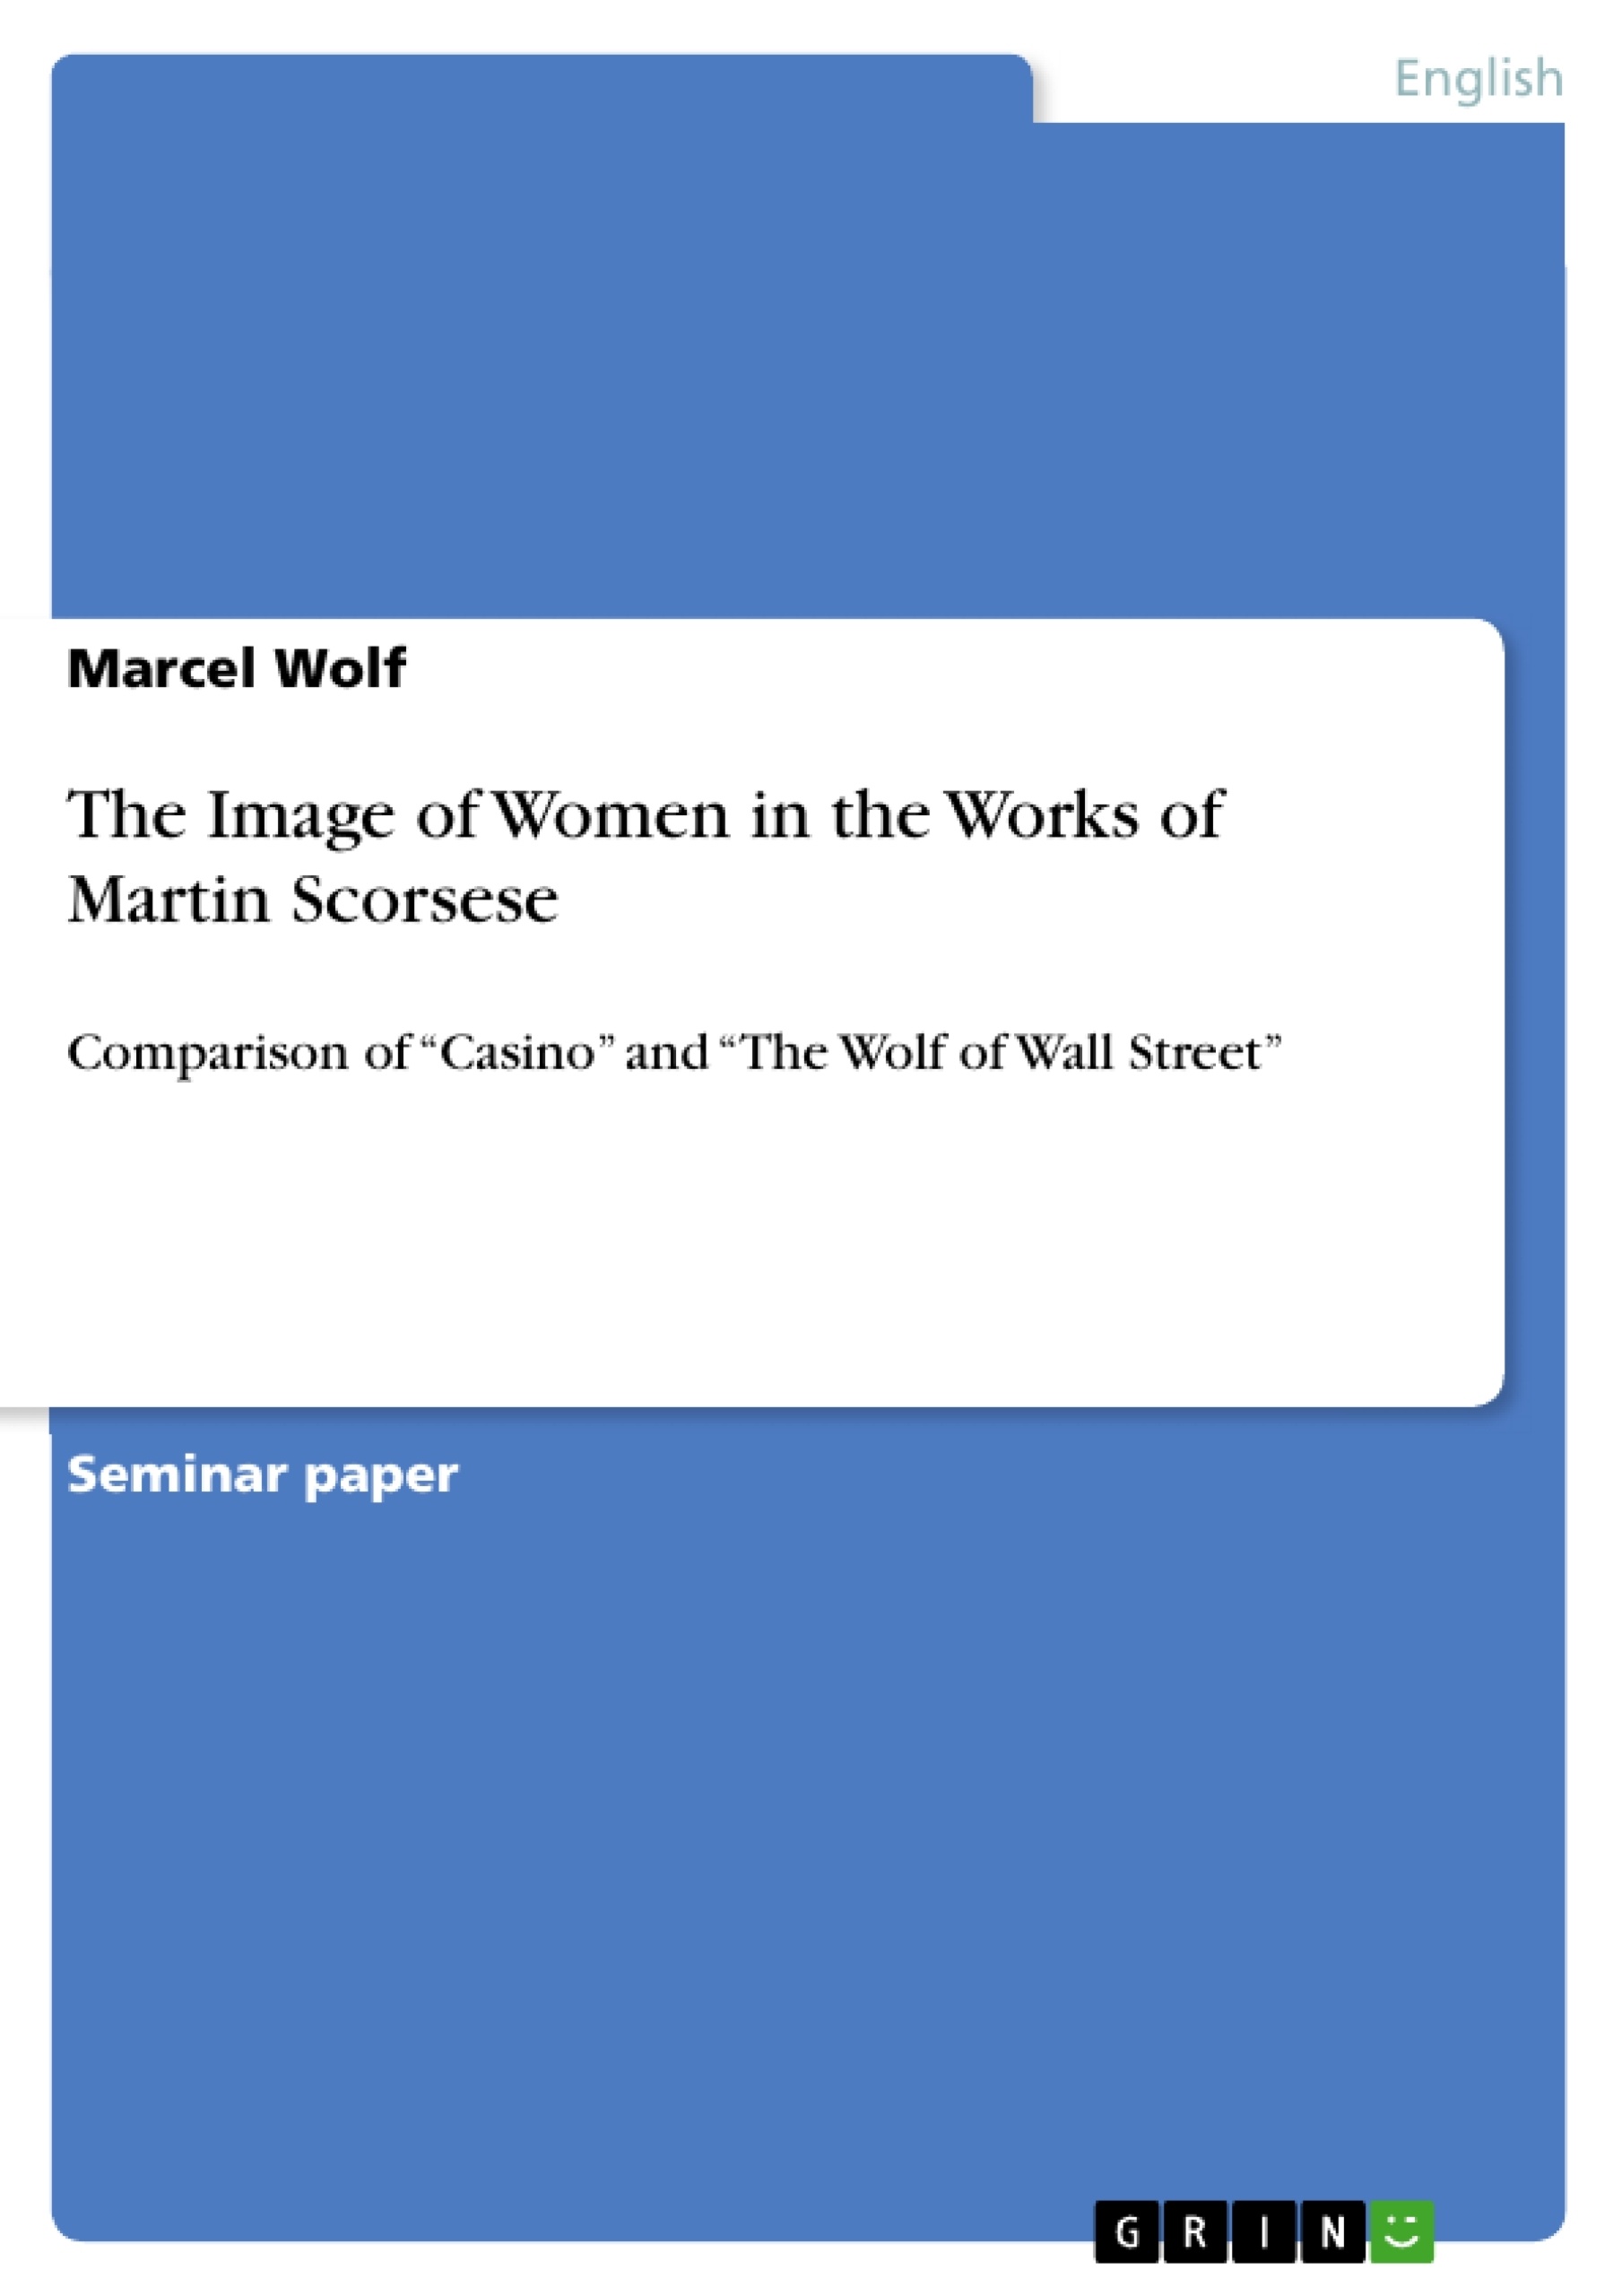 Title: The Image of Women in the Works of Martin Scorsese